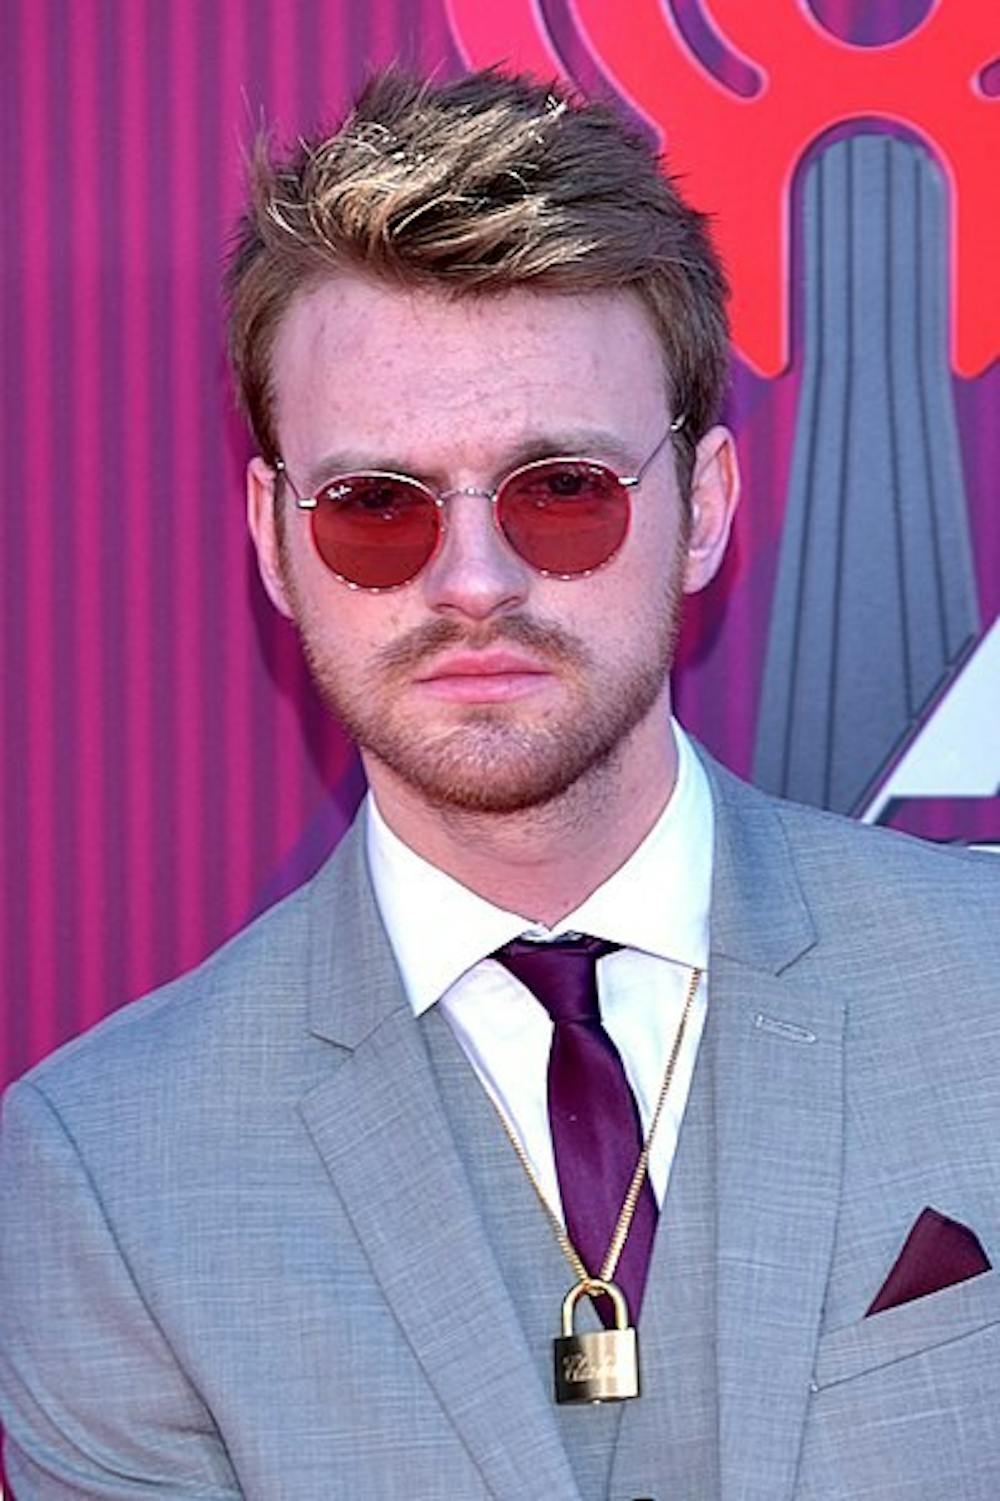 <h5>Finneas O'Connell at the 2019 iHeartRadio Music Awards</h5>
<h6>"Finneas O'Connell 2019 by Glenn Francis" by Glenn Francis / <a href="https://commons.wikimedia.org/wiki/File:Finneas_O%27Connell_2019_by_Glenn_Francis.jpg" target="_self">CC BY-SA 4.0</a></h6>